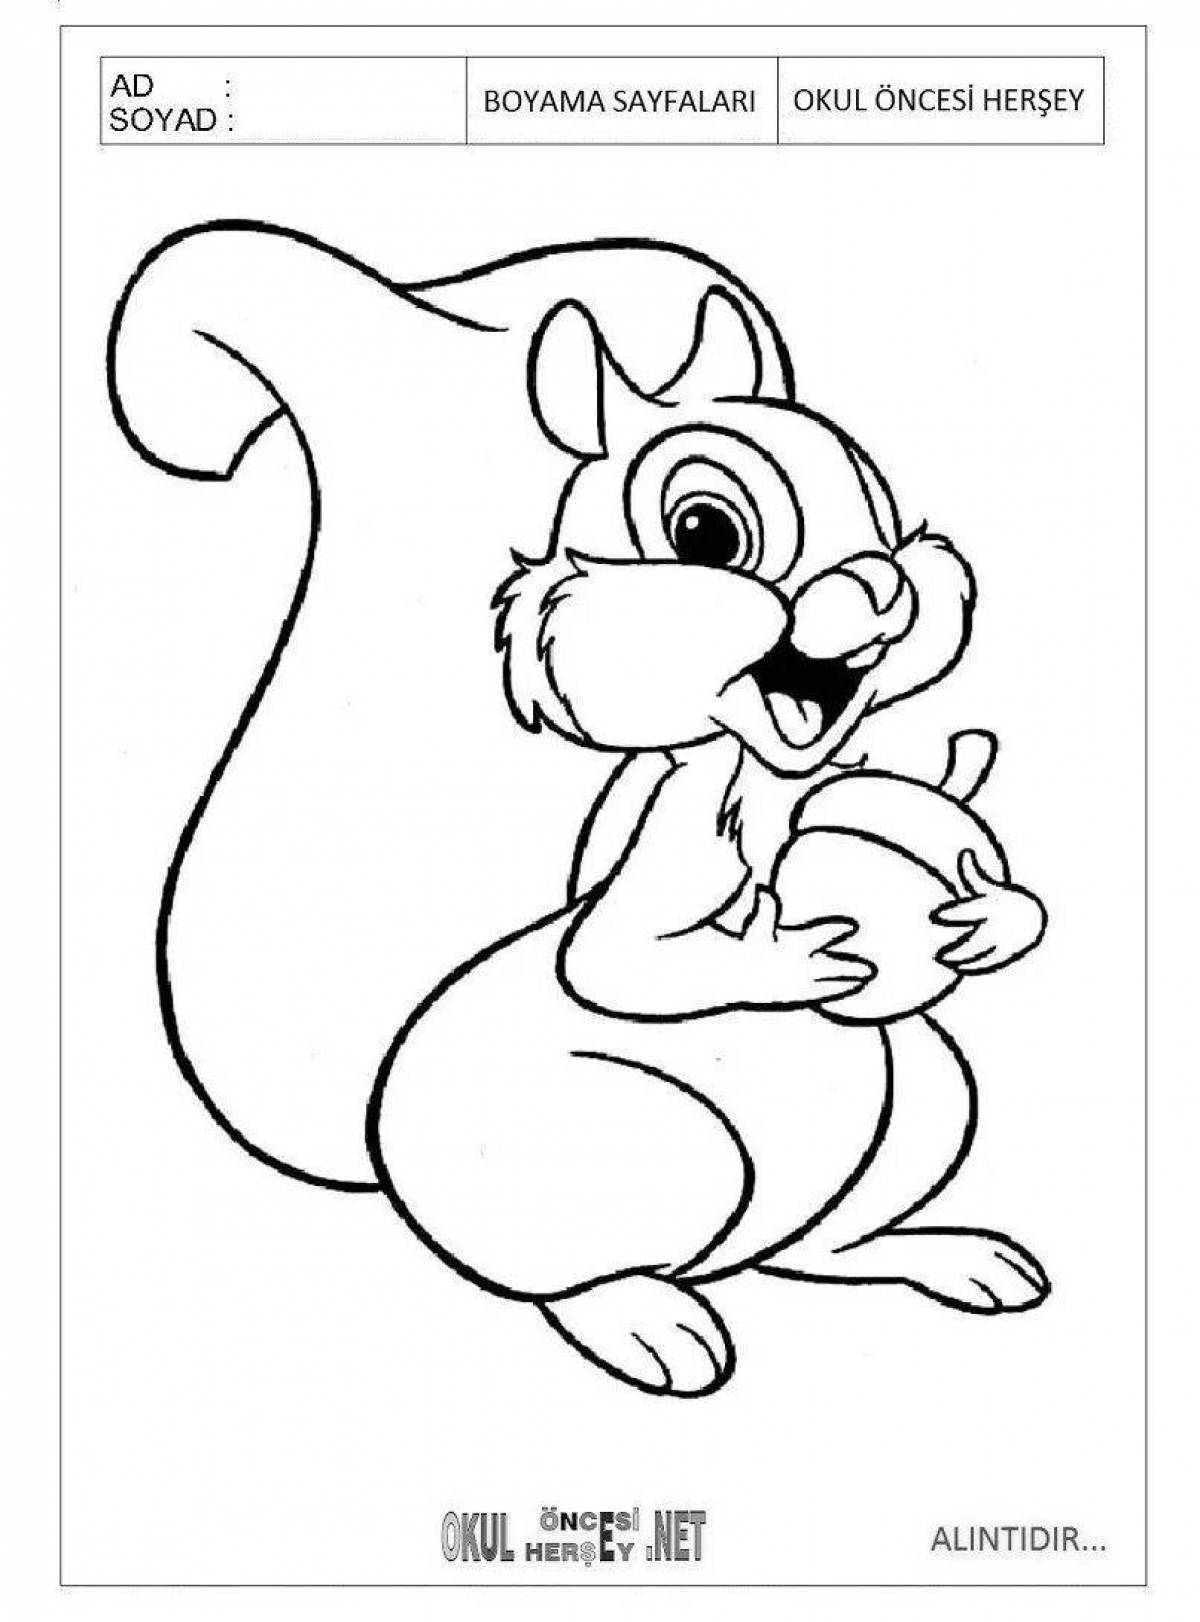 Charming squirrel coloring book for kids 6-7 years old